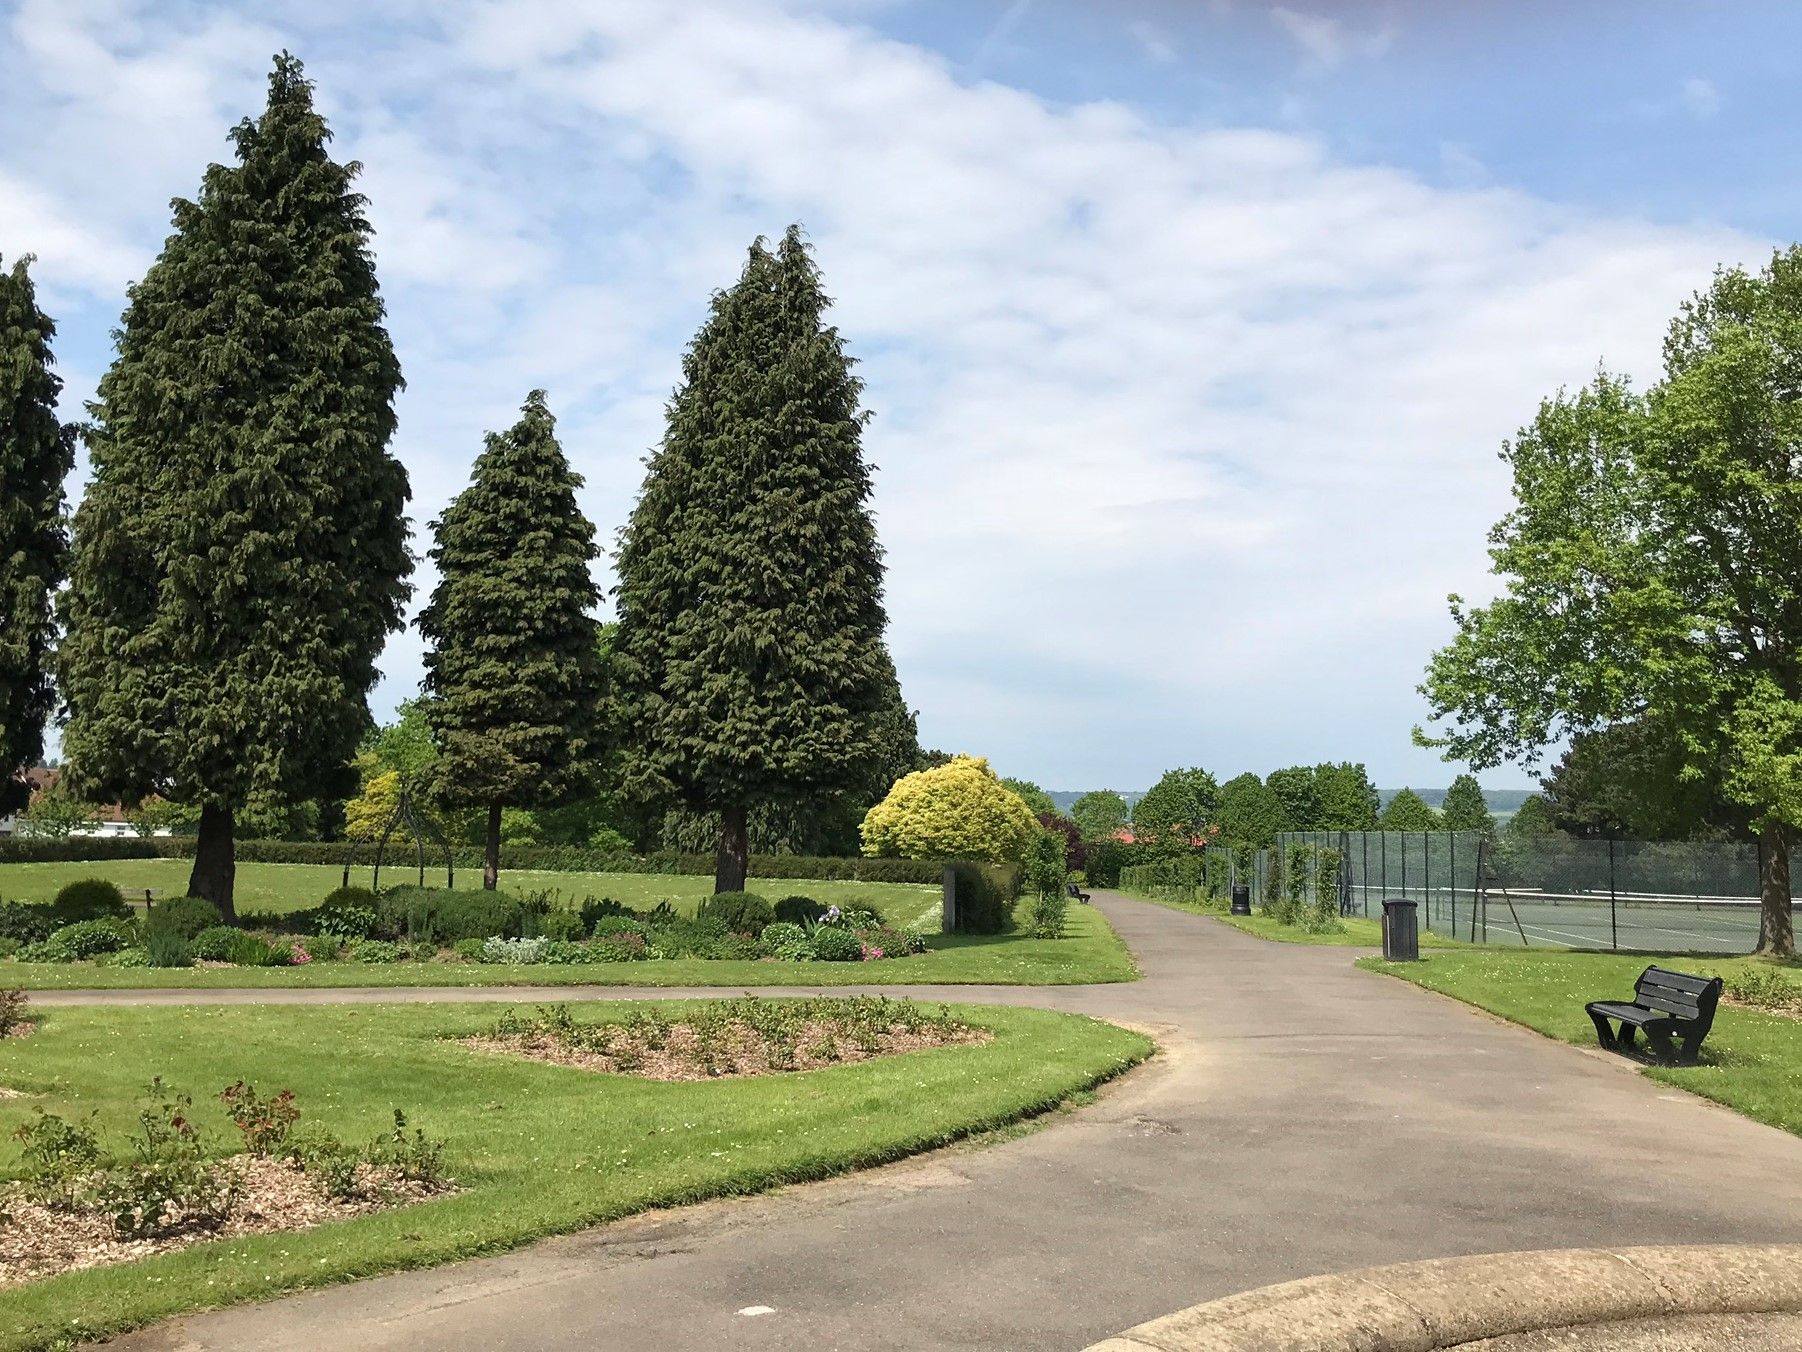 Formal gardens and tennis courts